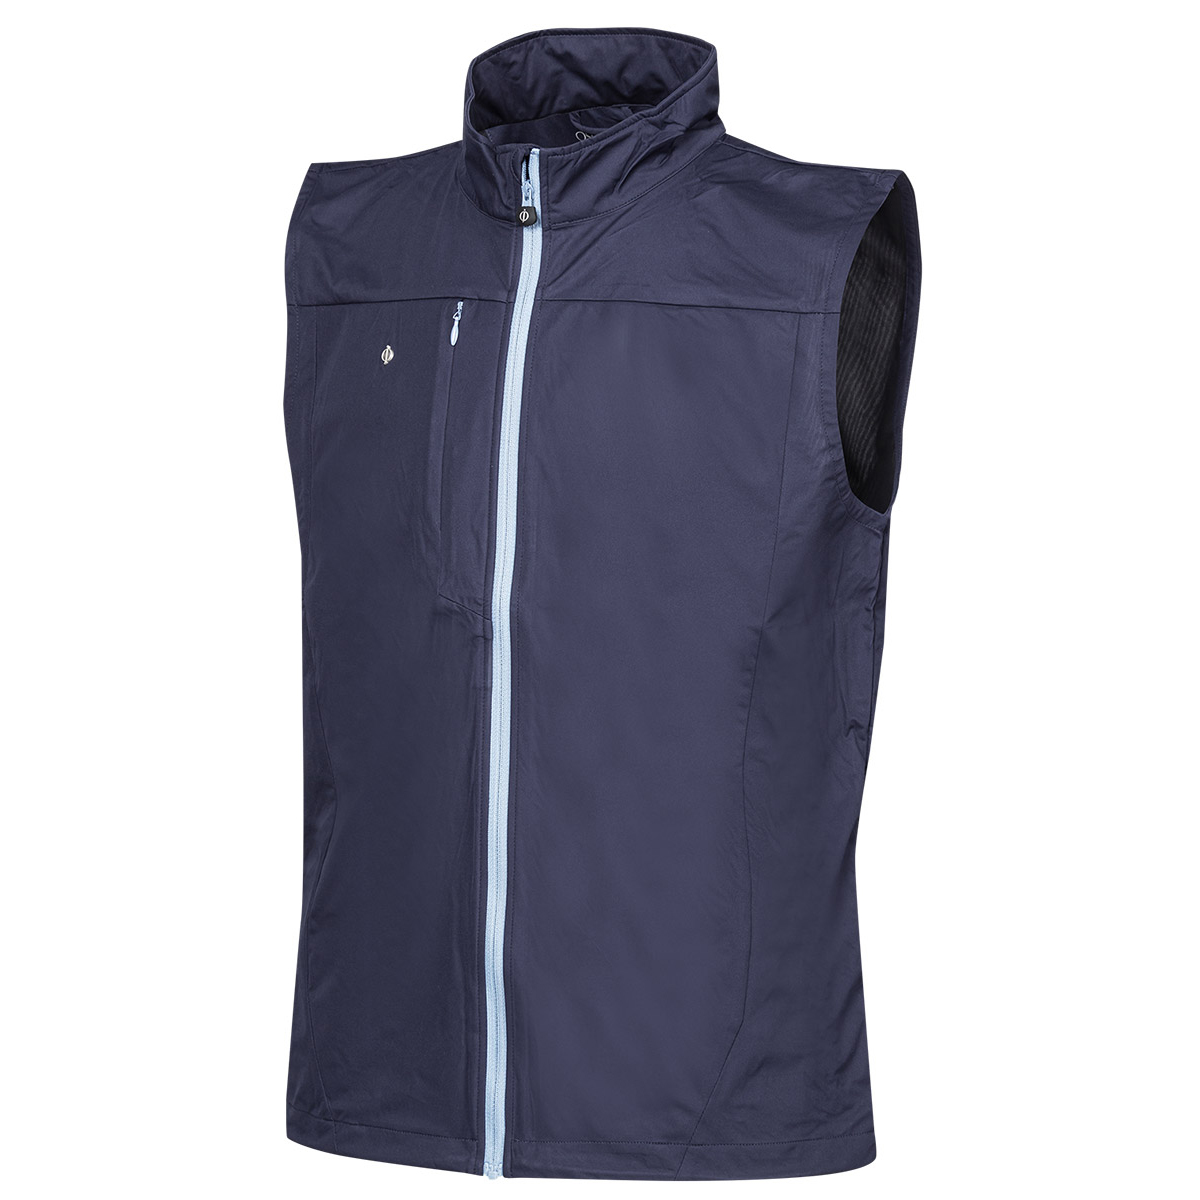 Oscar Jacobson Gregory Pin Gilet from american golf